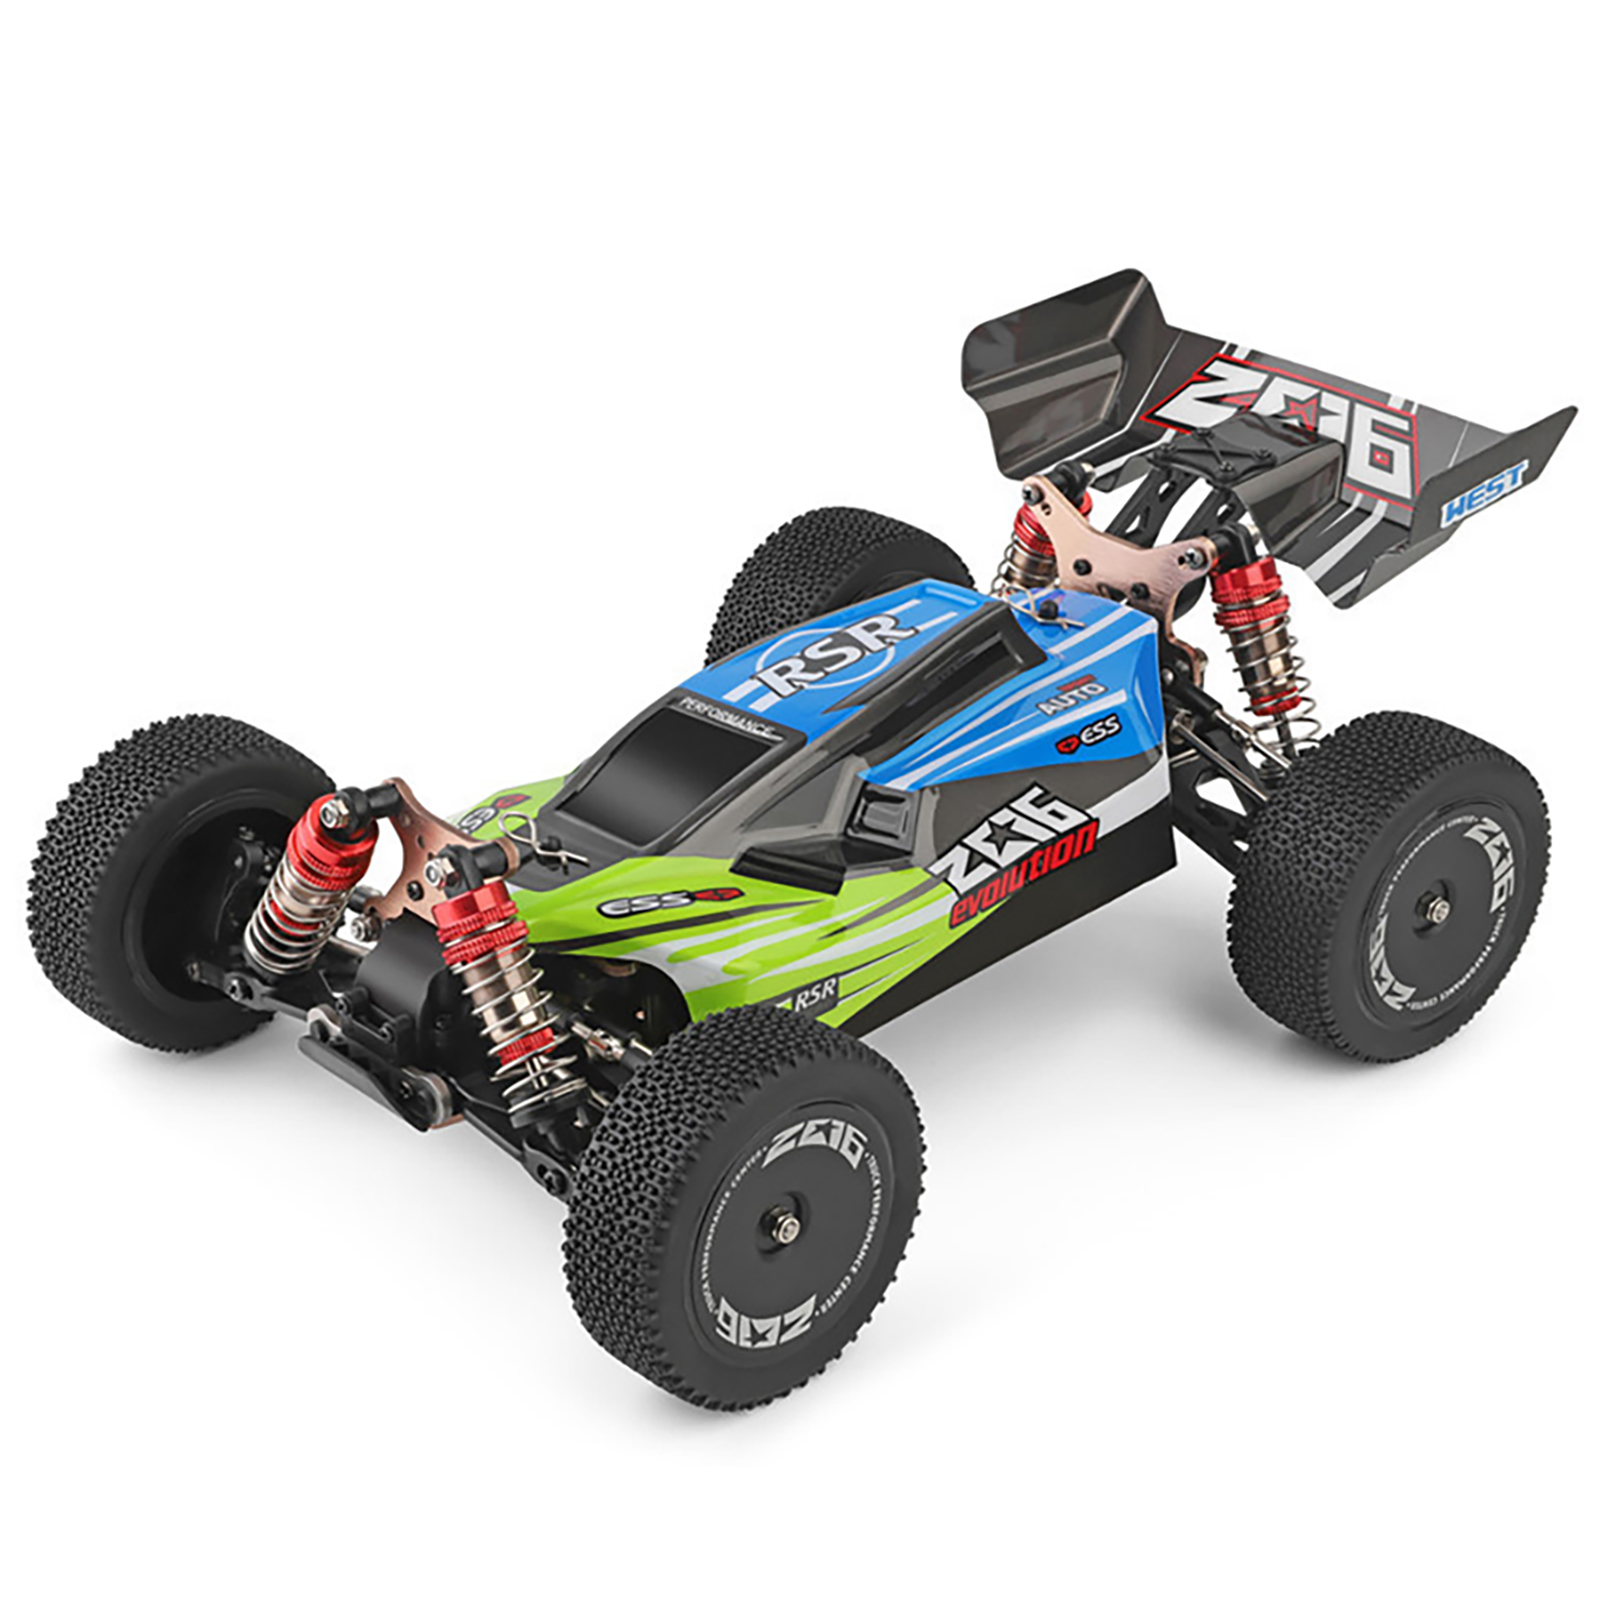 WLtoys 1:14 2.4g RC Racing Drift Car 65km/H High Speed Off-Road Vehicle Shock Absorption Remote Control Car